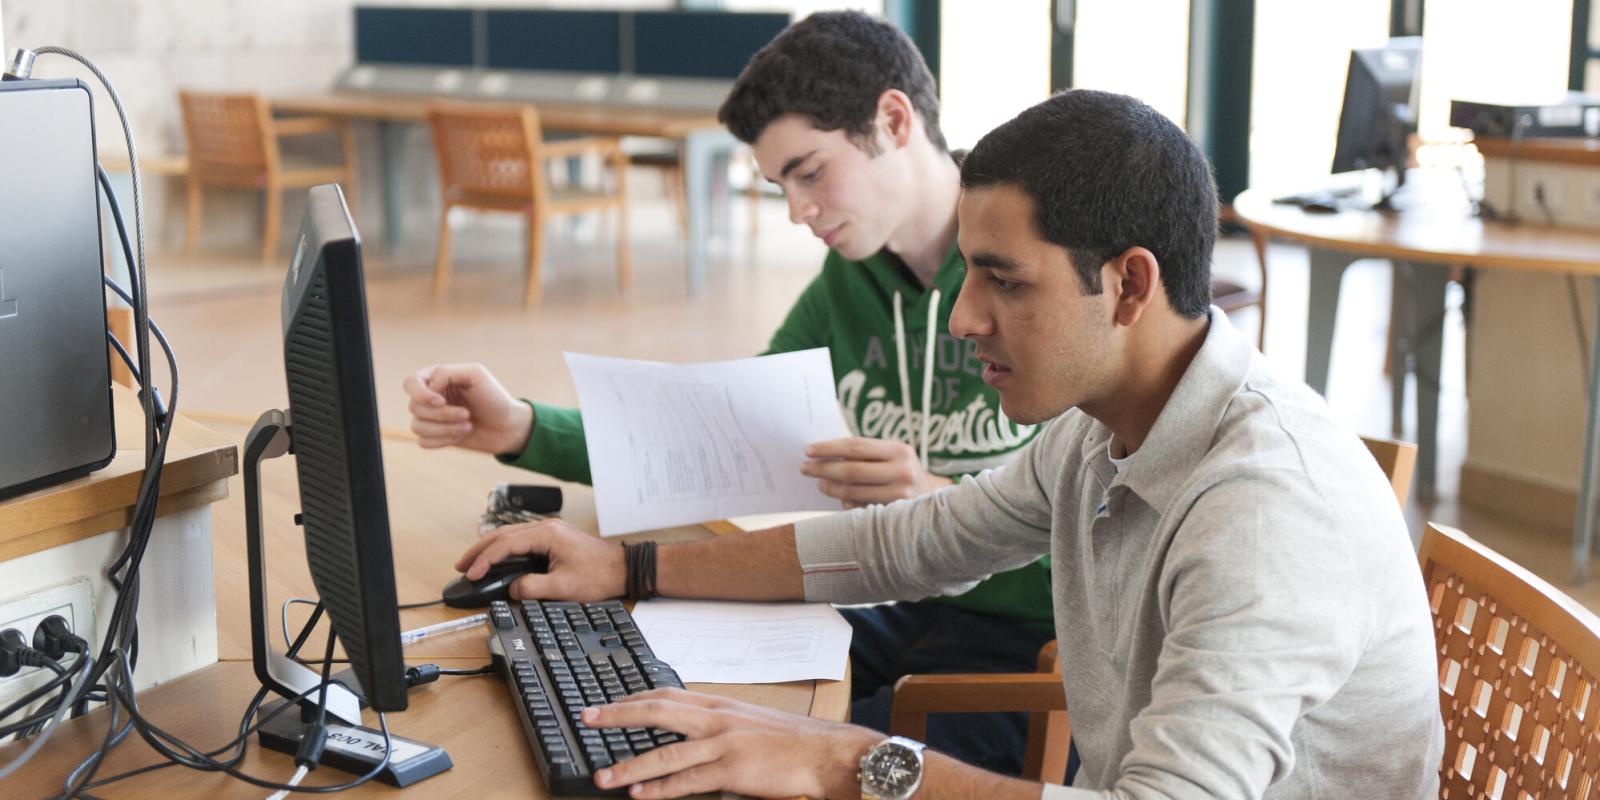 Students using laptops and working 